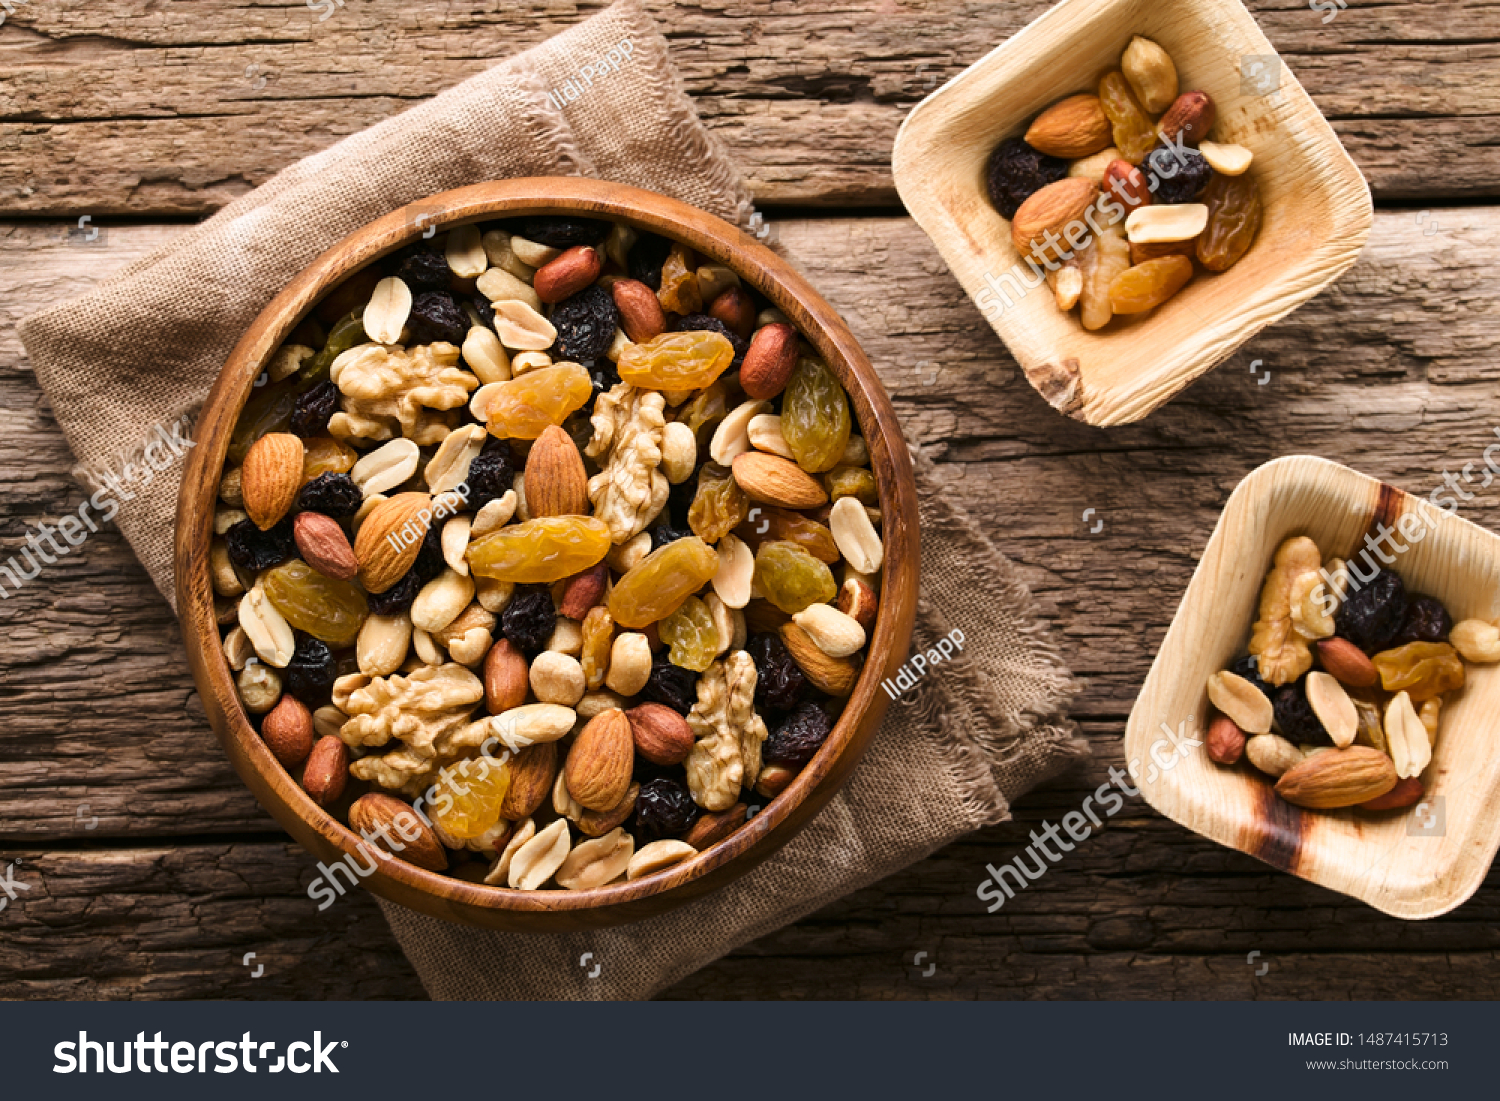 Healthy trail mix snack made of nuts (walnut, almond, peanut) and dried fruits (raisin, sultana) in wooden bowl, photographed overhead (Selective Focus, Focus on the trail mix in the big bowl) #1487415713